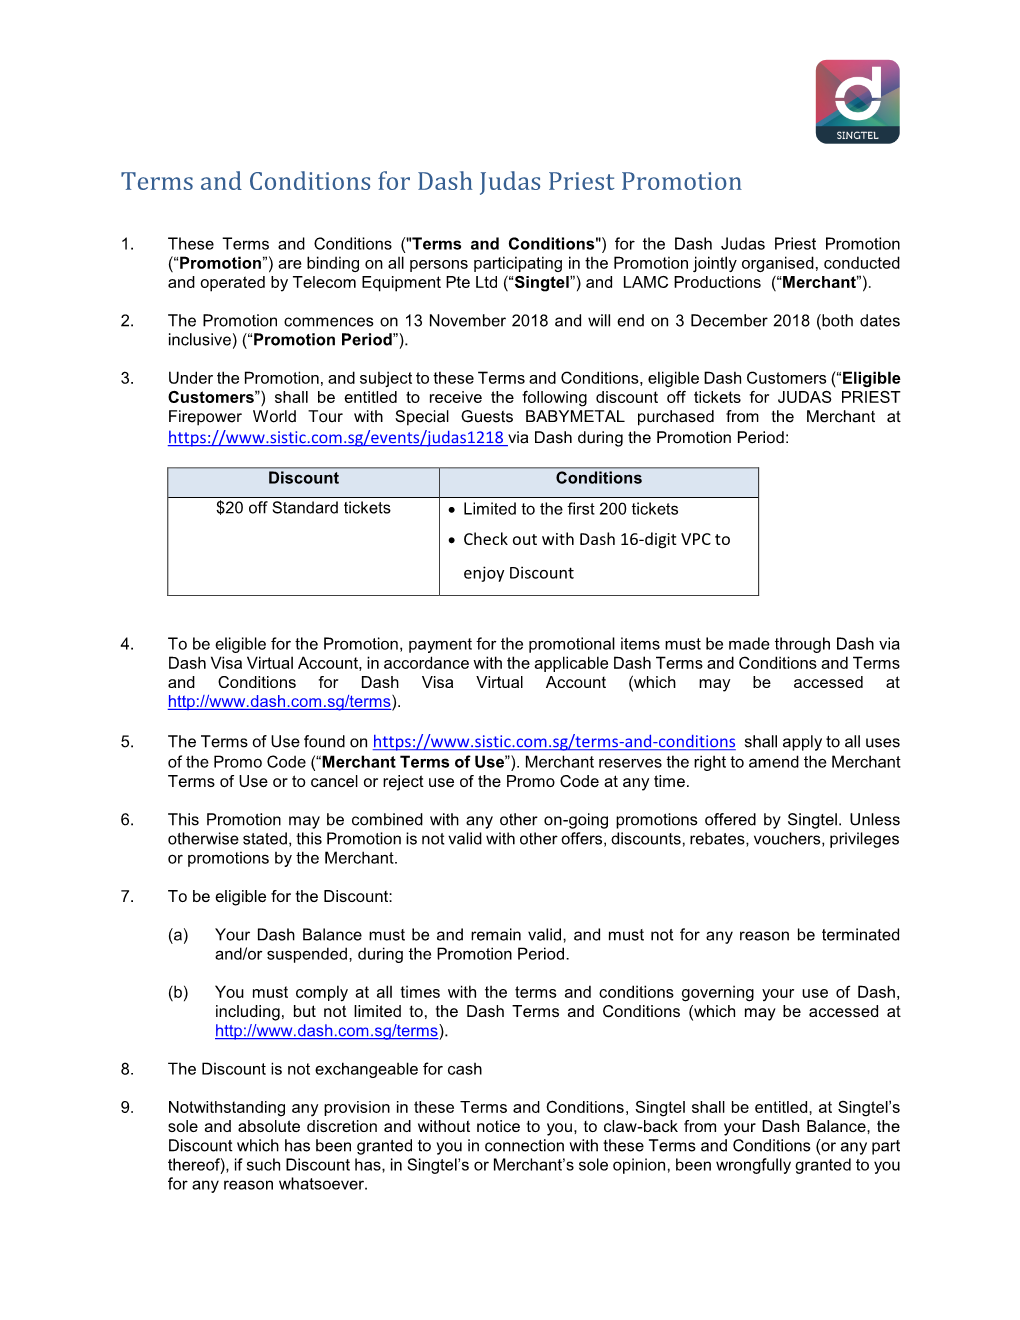 Terms and Conditions for Dash Judas Priest Promotion